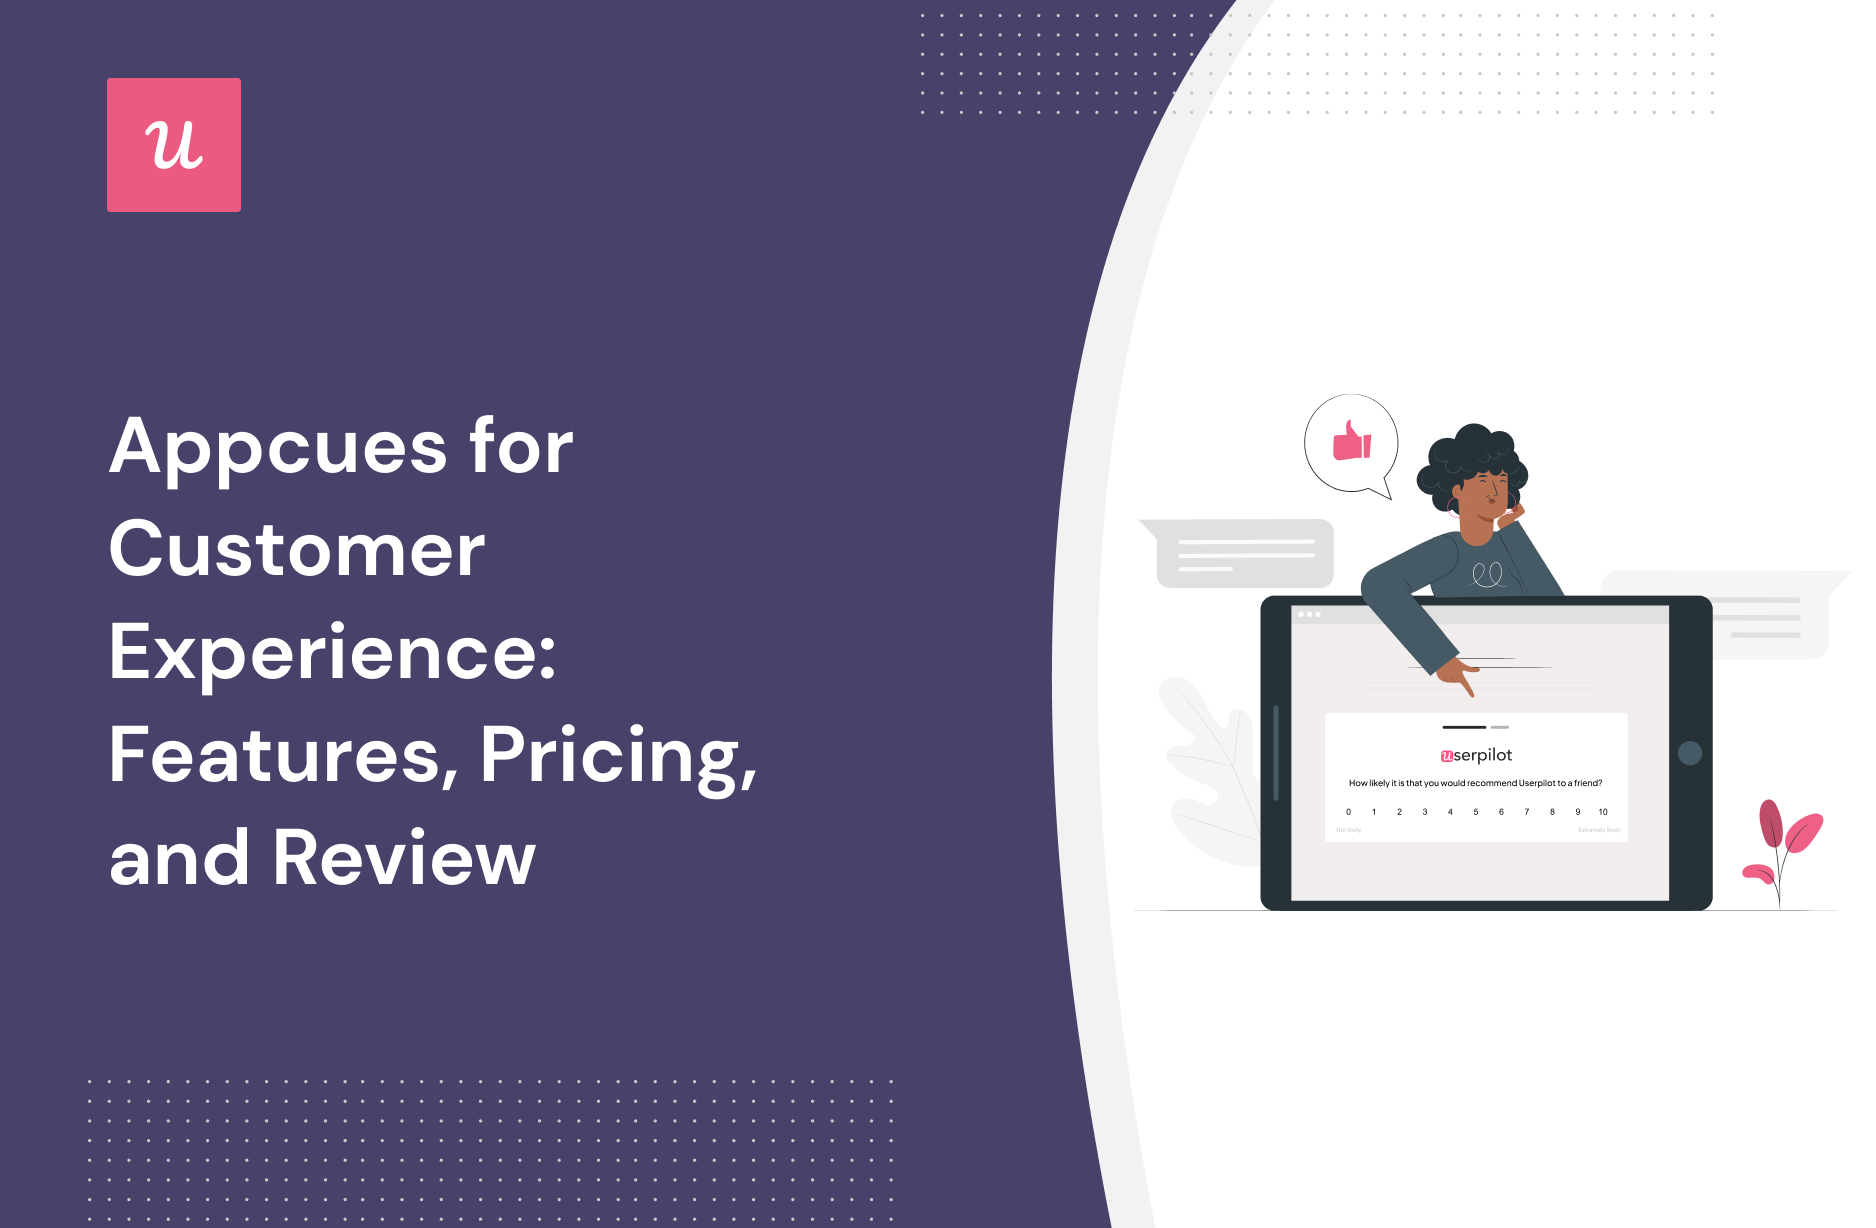 Appcues for Customer experience: Features, Pricing, and Review